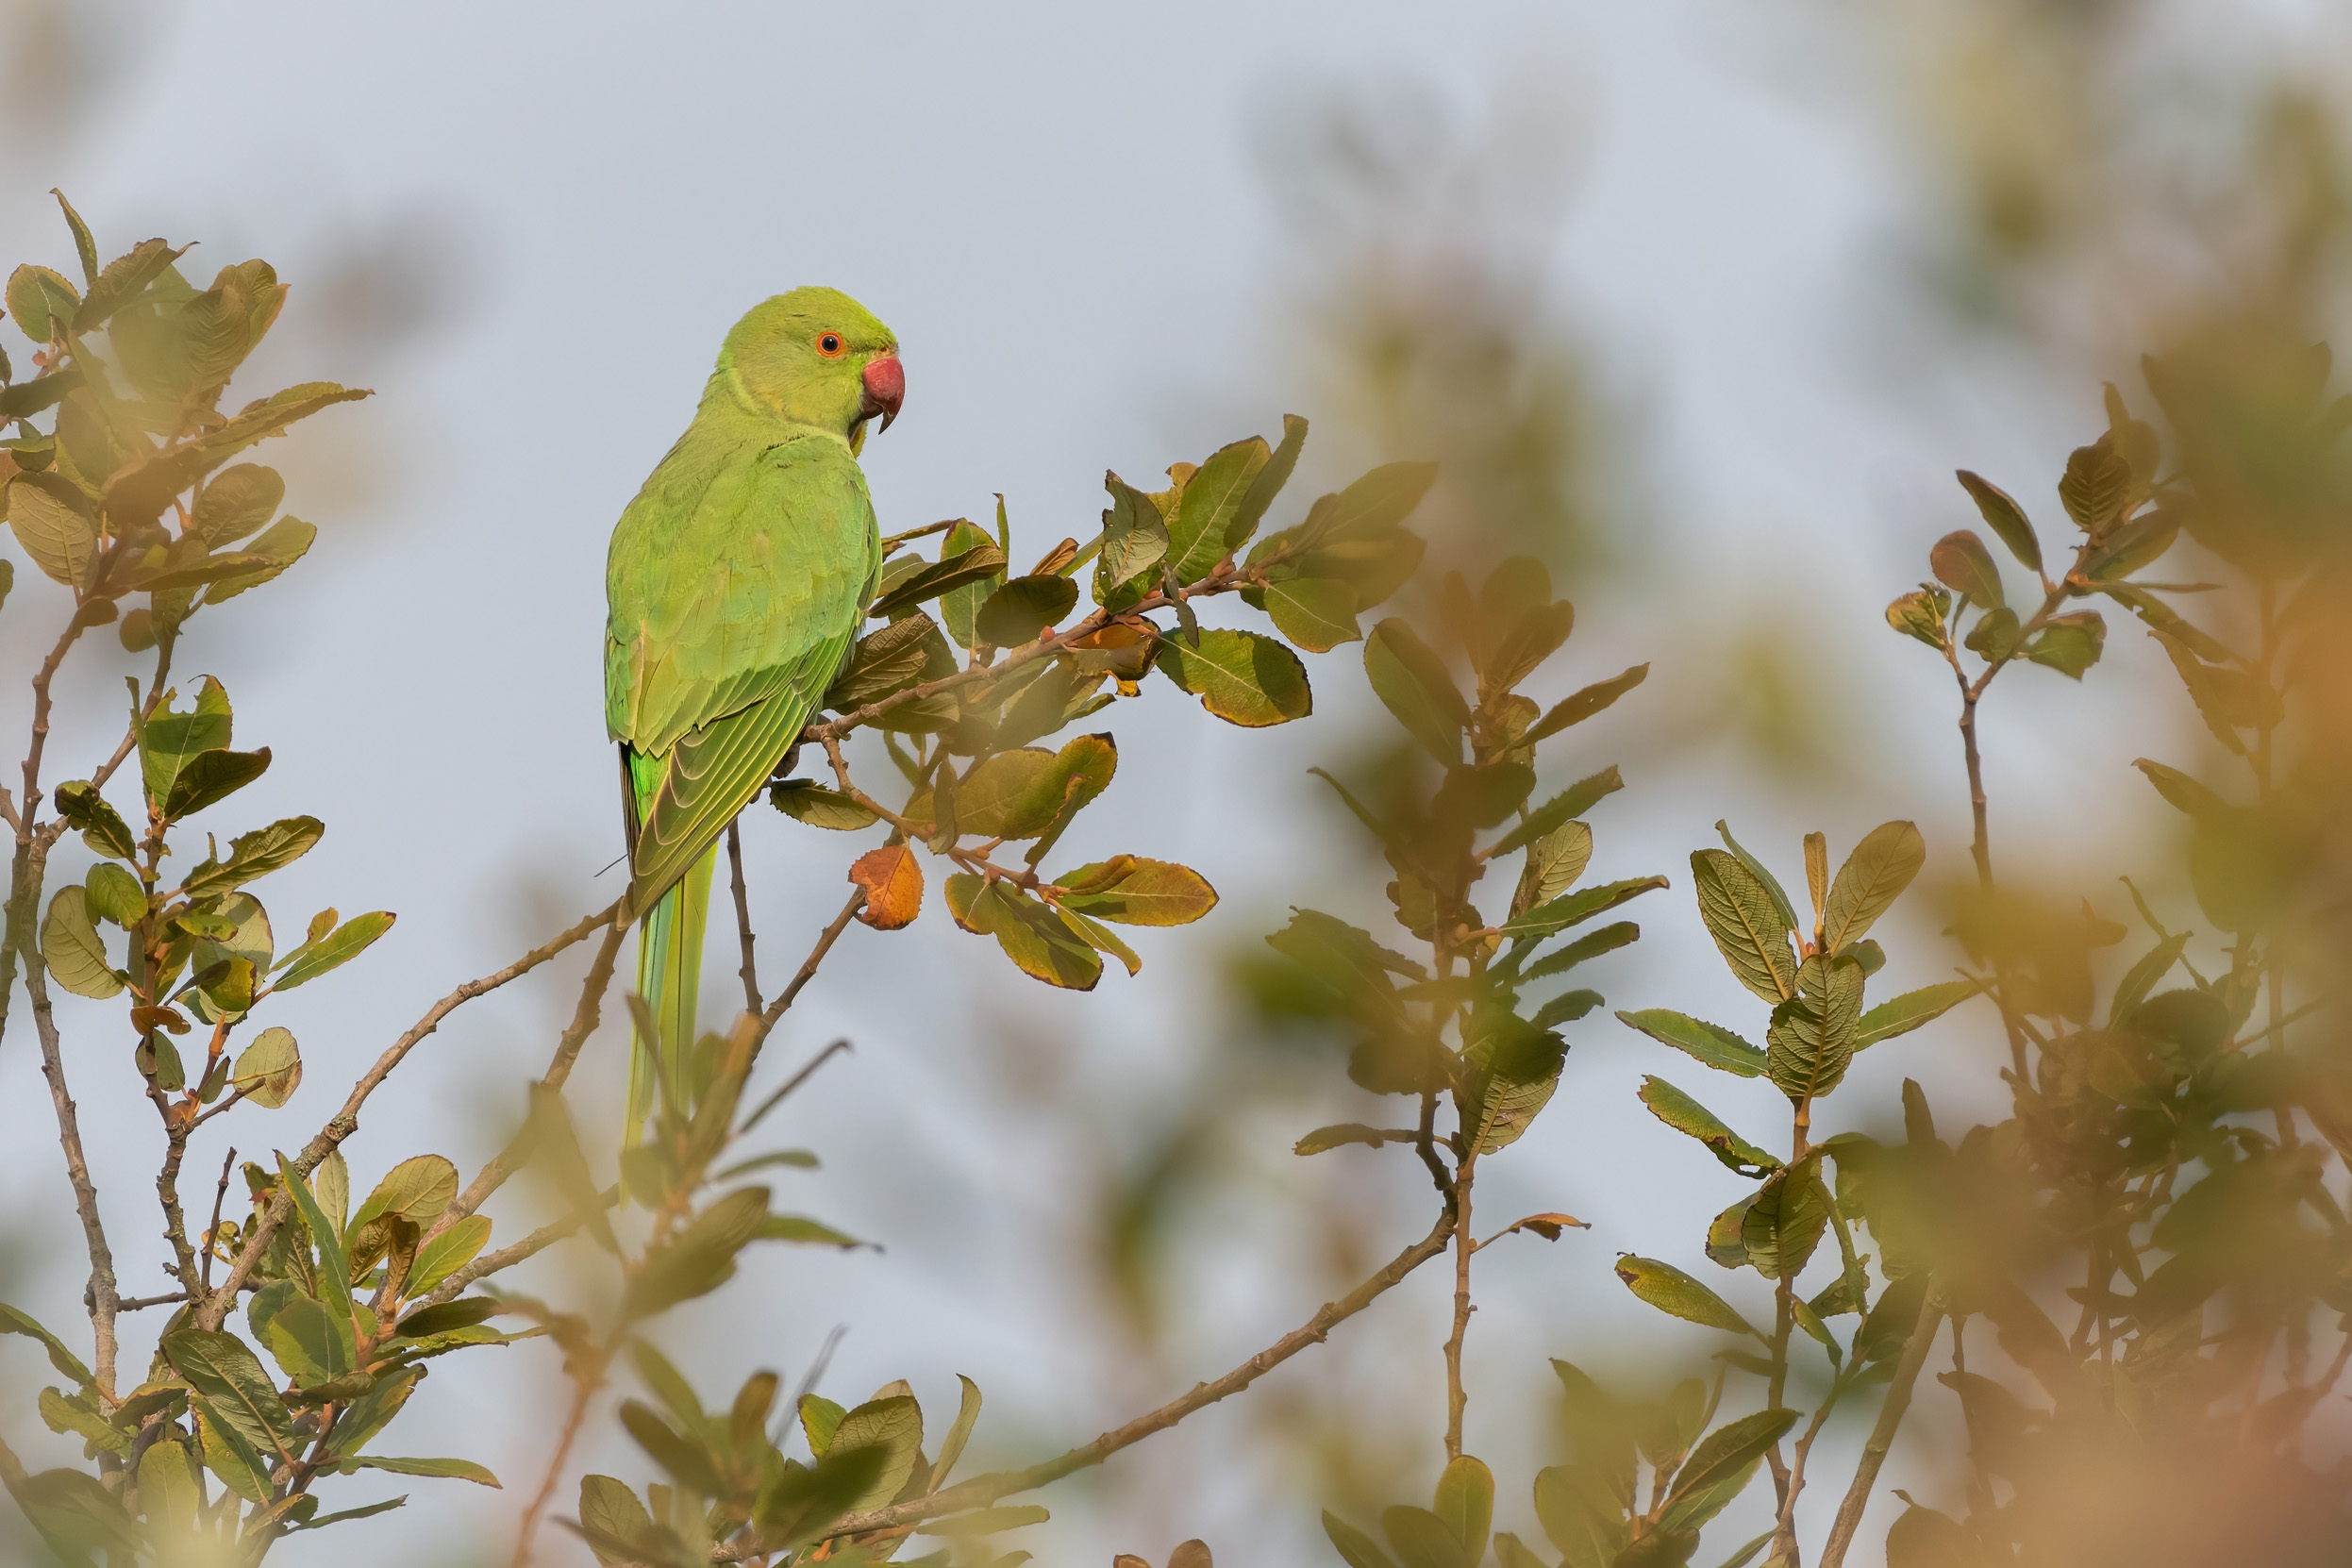 A lone Ring-necked Parakeet perched at the top of a tree, surrounded by green leaves,